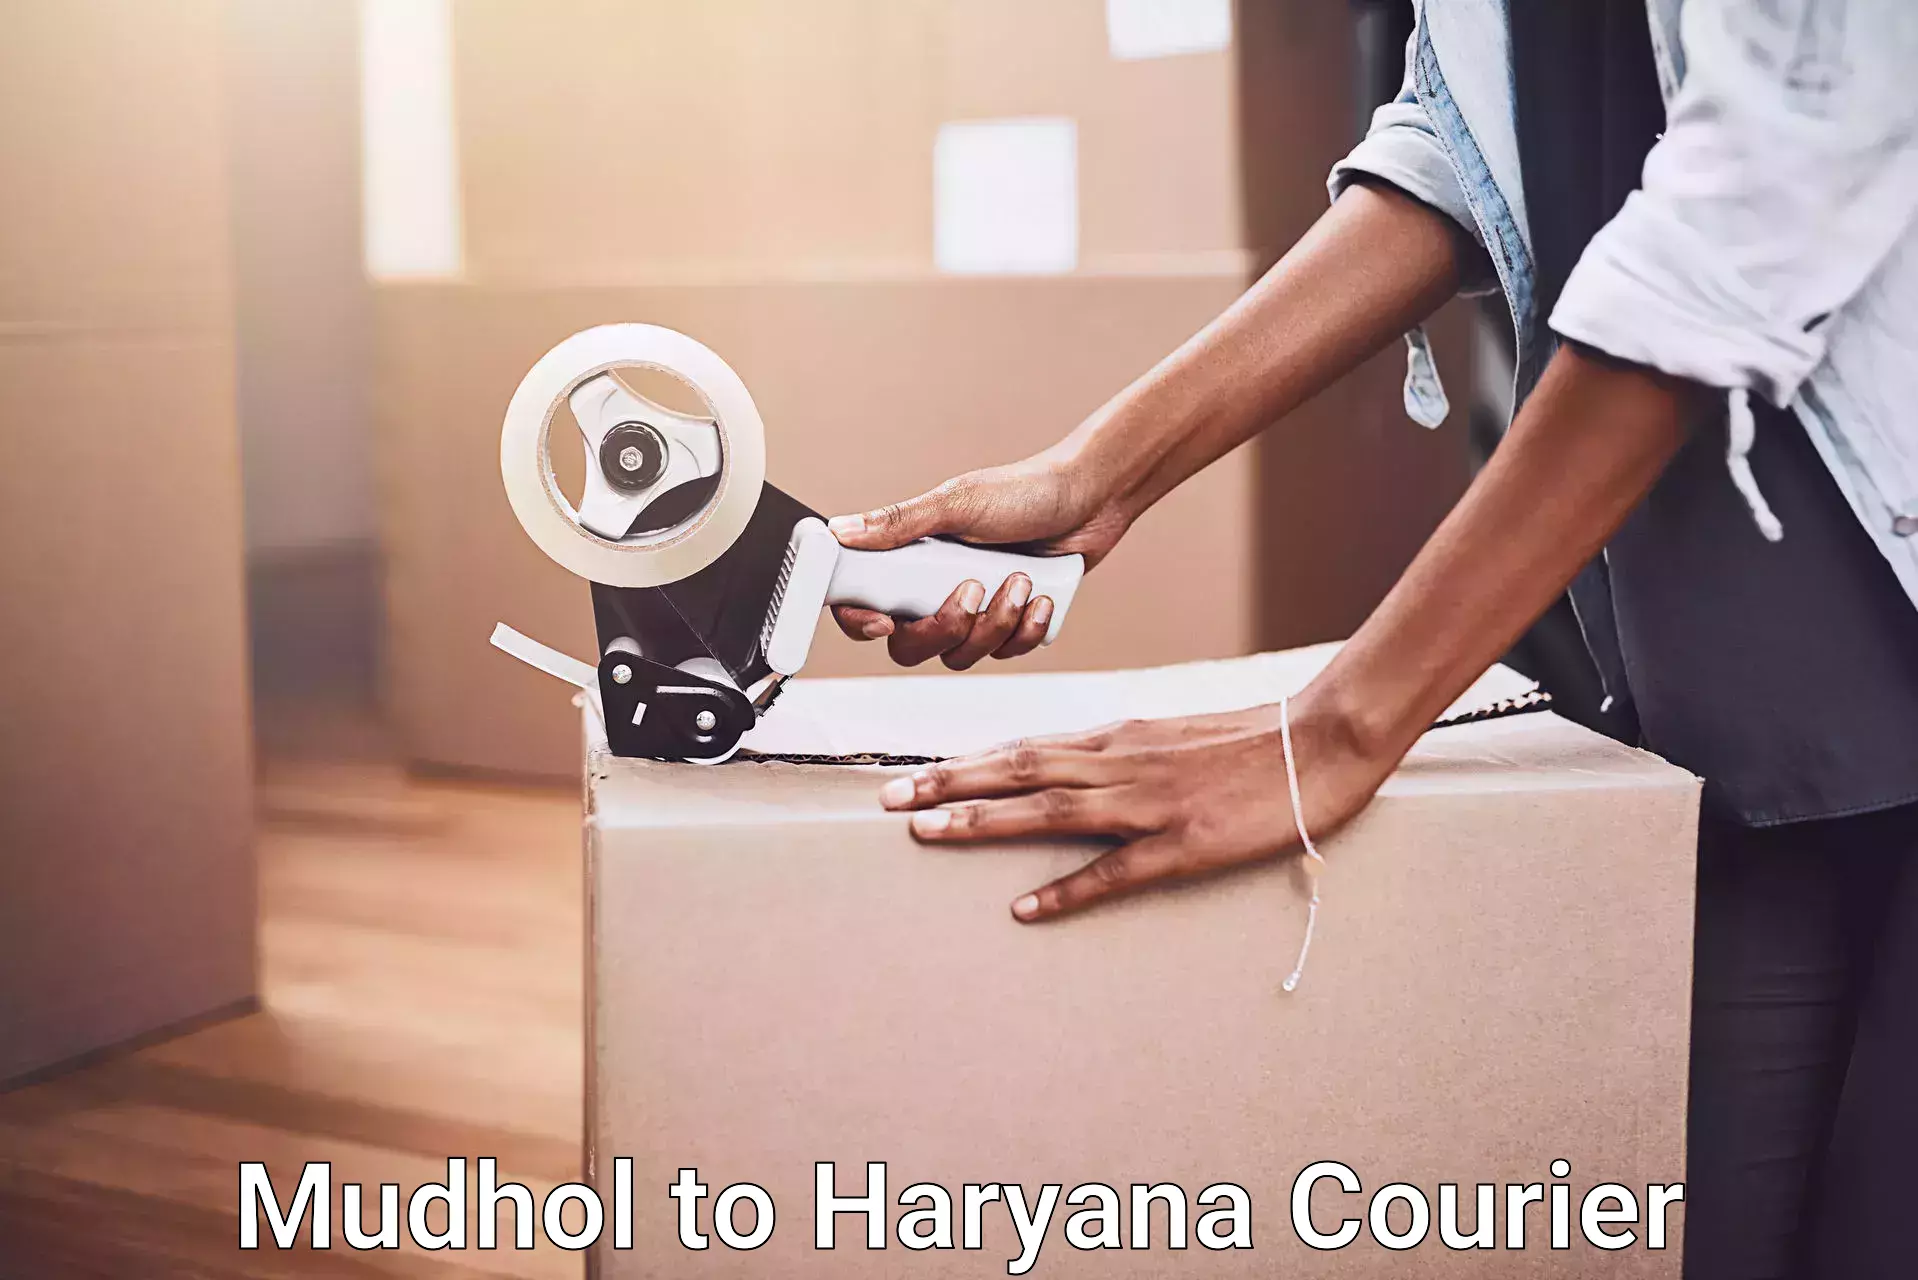 Trusted relocation experts Mudhol to Haryana